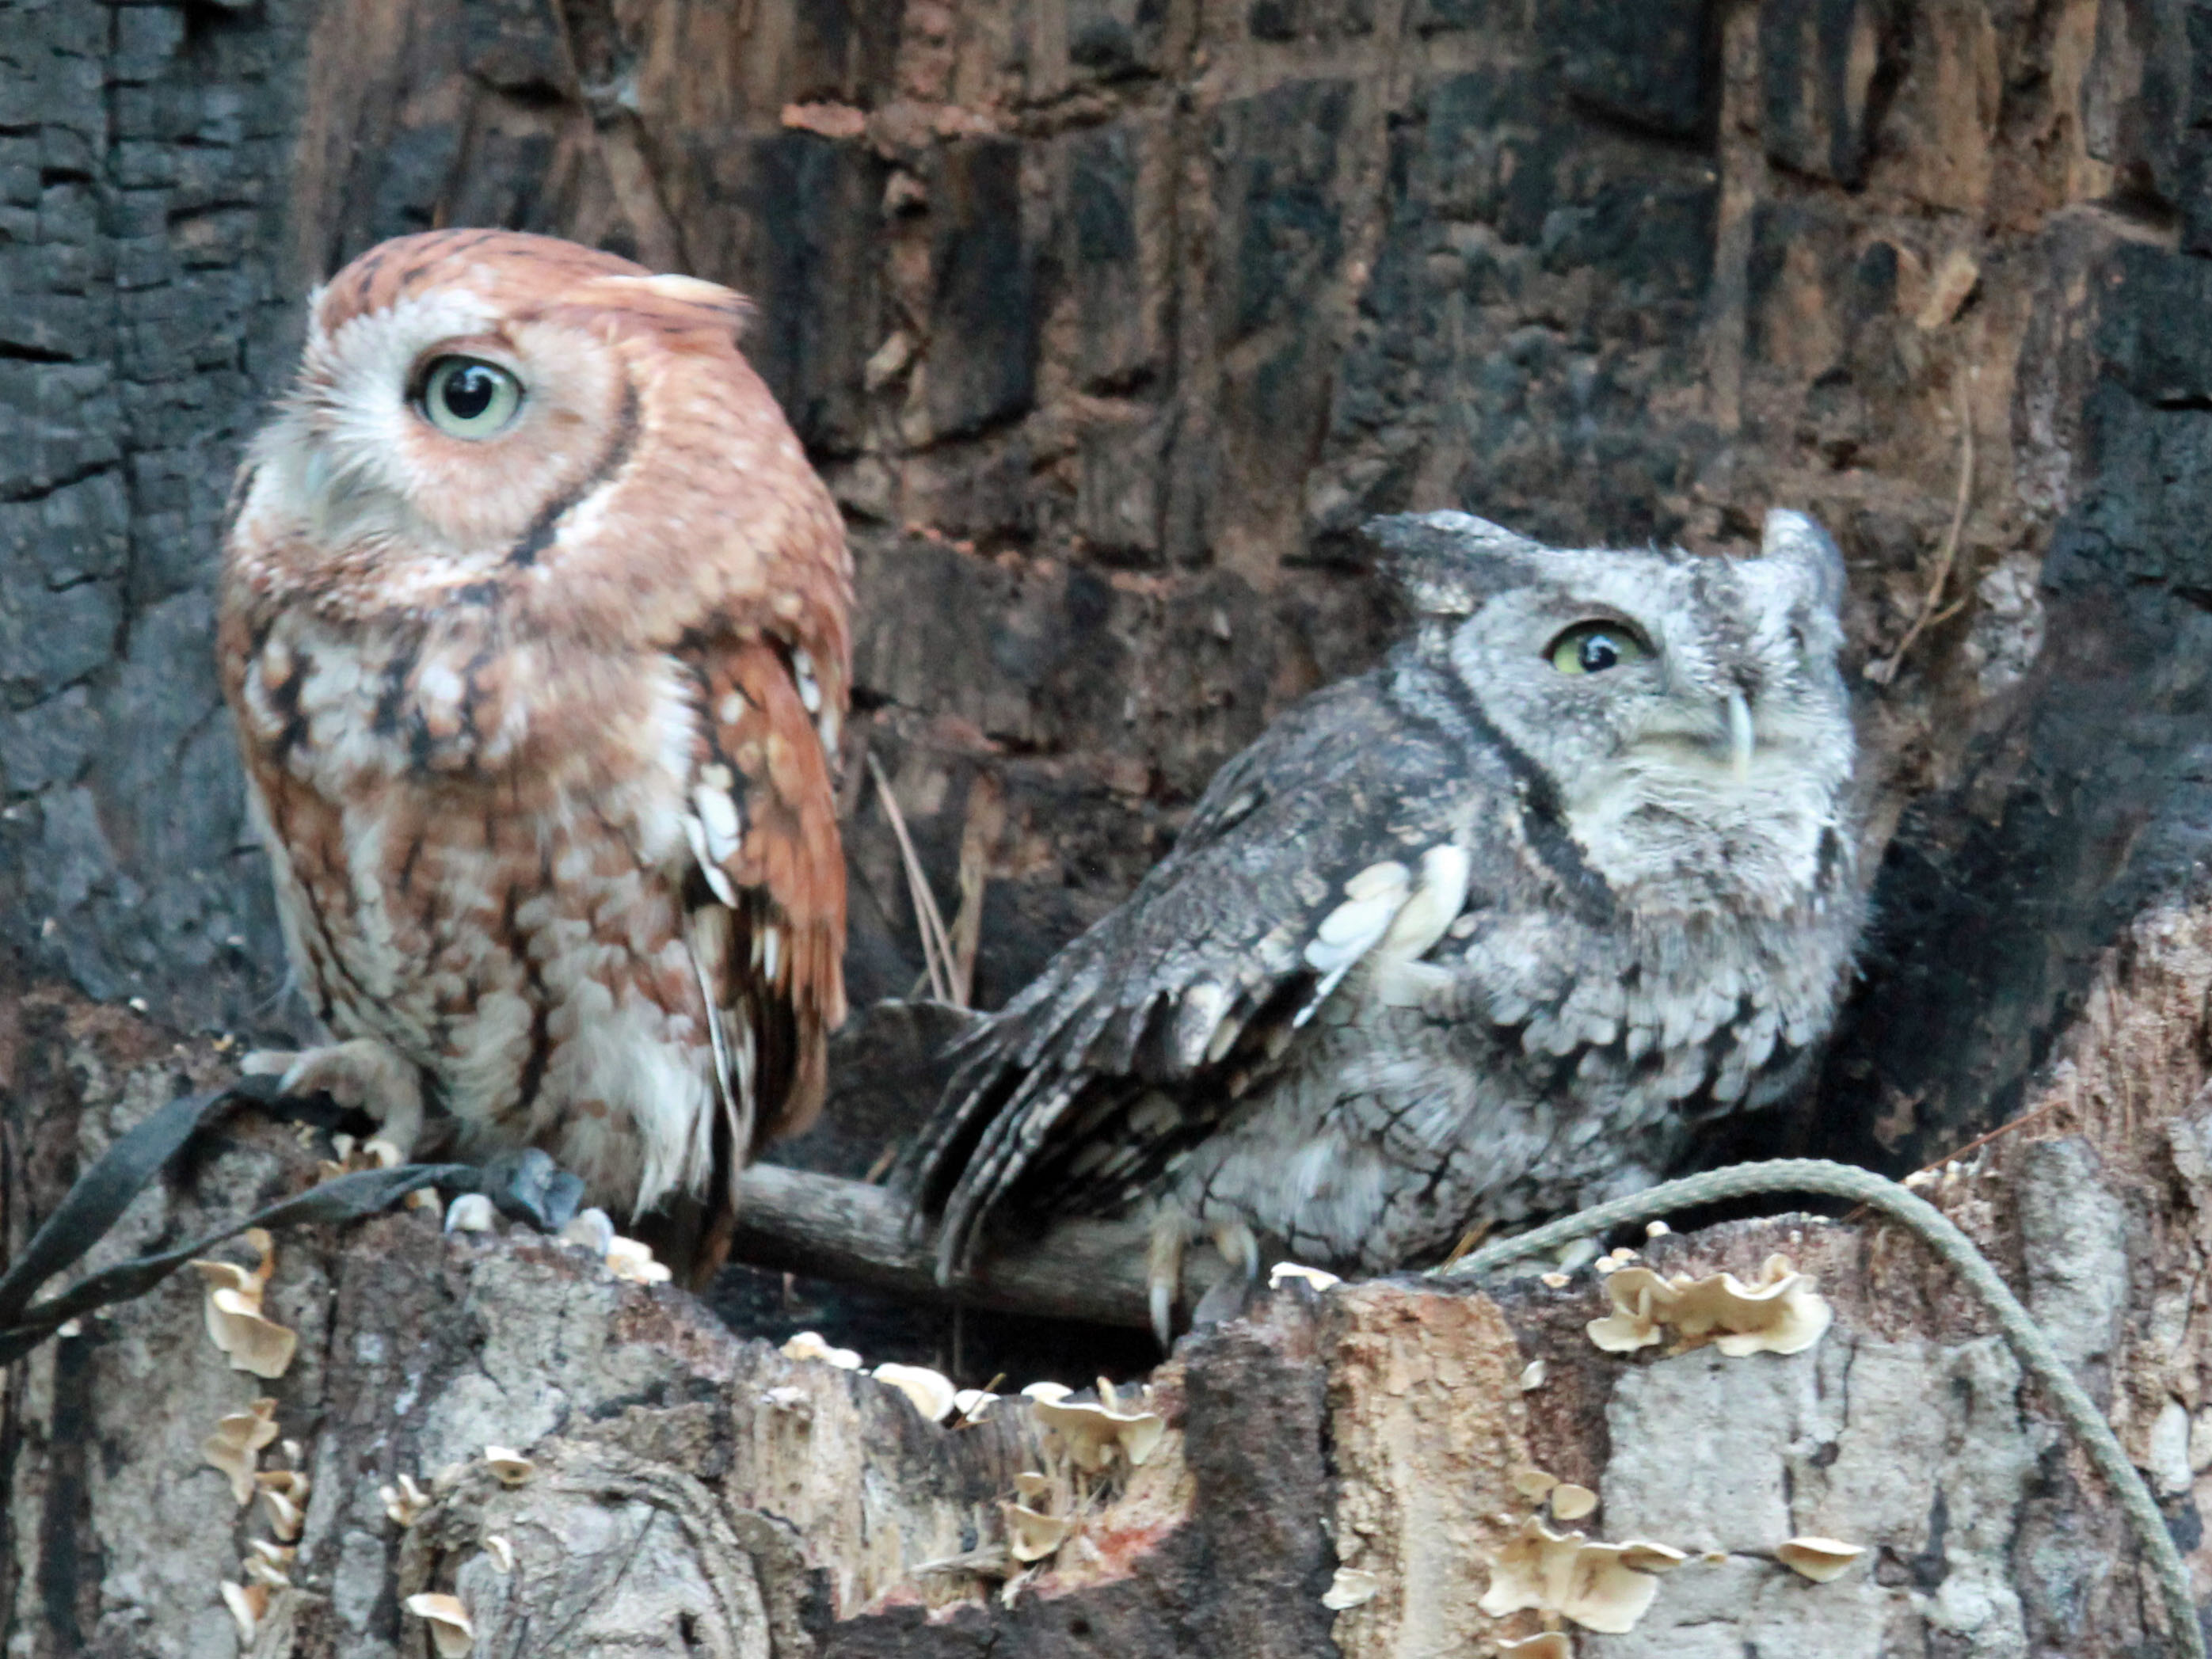 Close-up of two small stocky owls, one red and one gray, sitting in the hollow of a tree